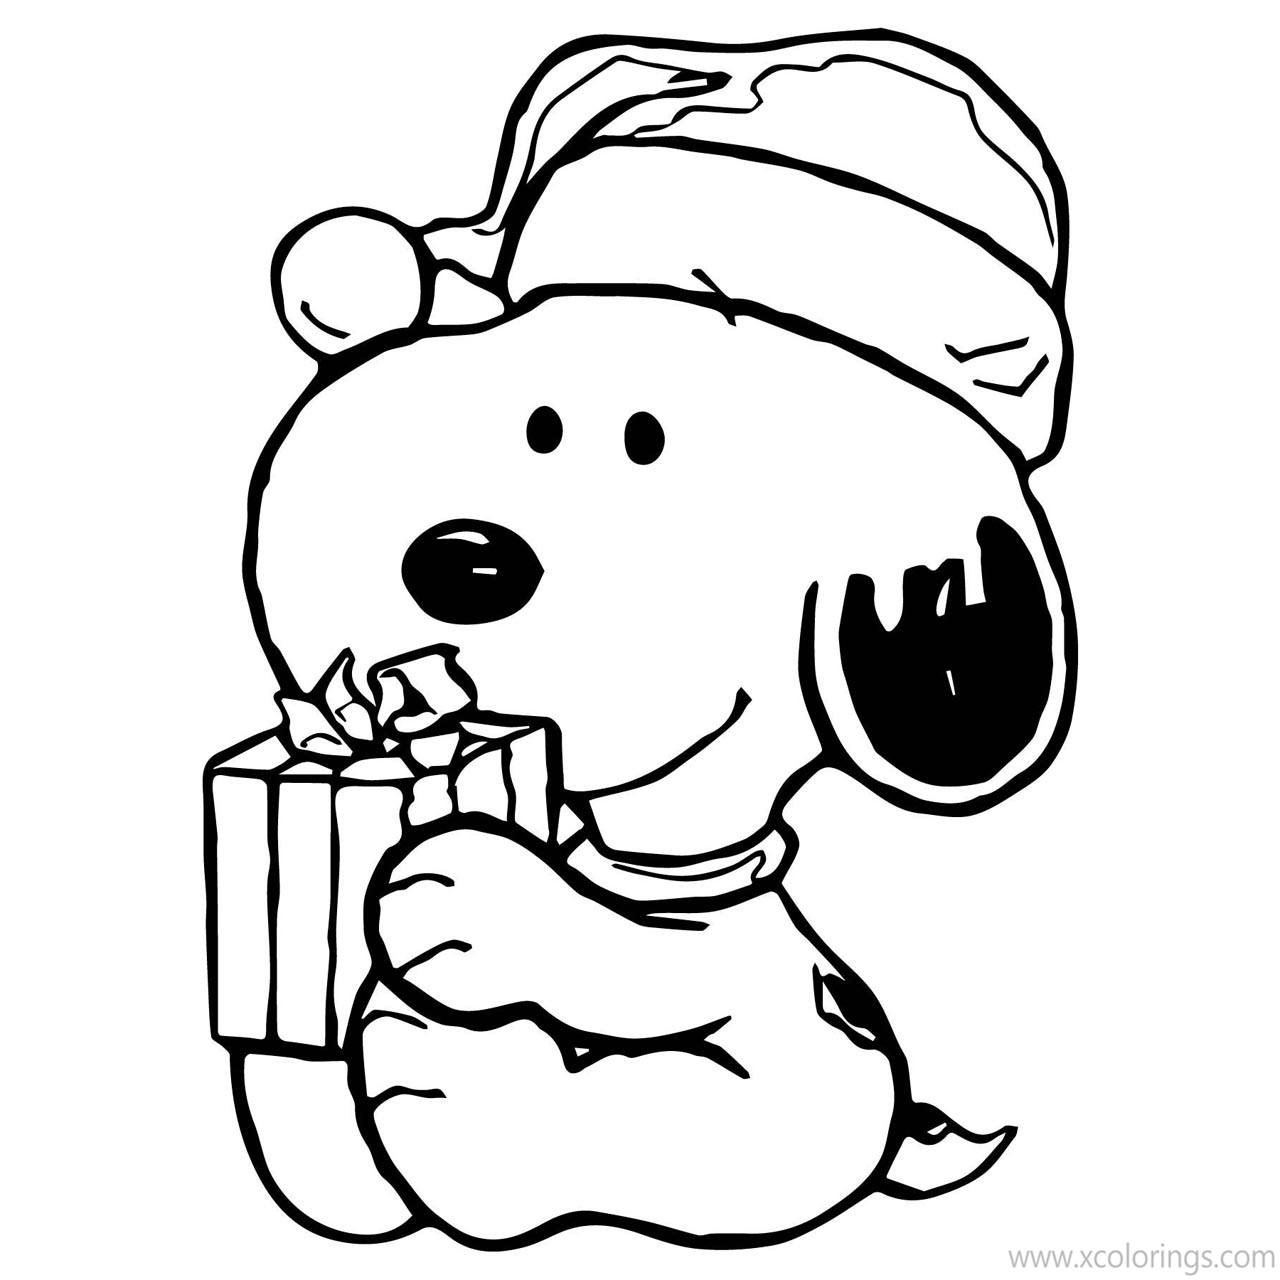 Free Charlie Brown Christmas Coloring Pages Snoopy with Christmas Gift printable